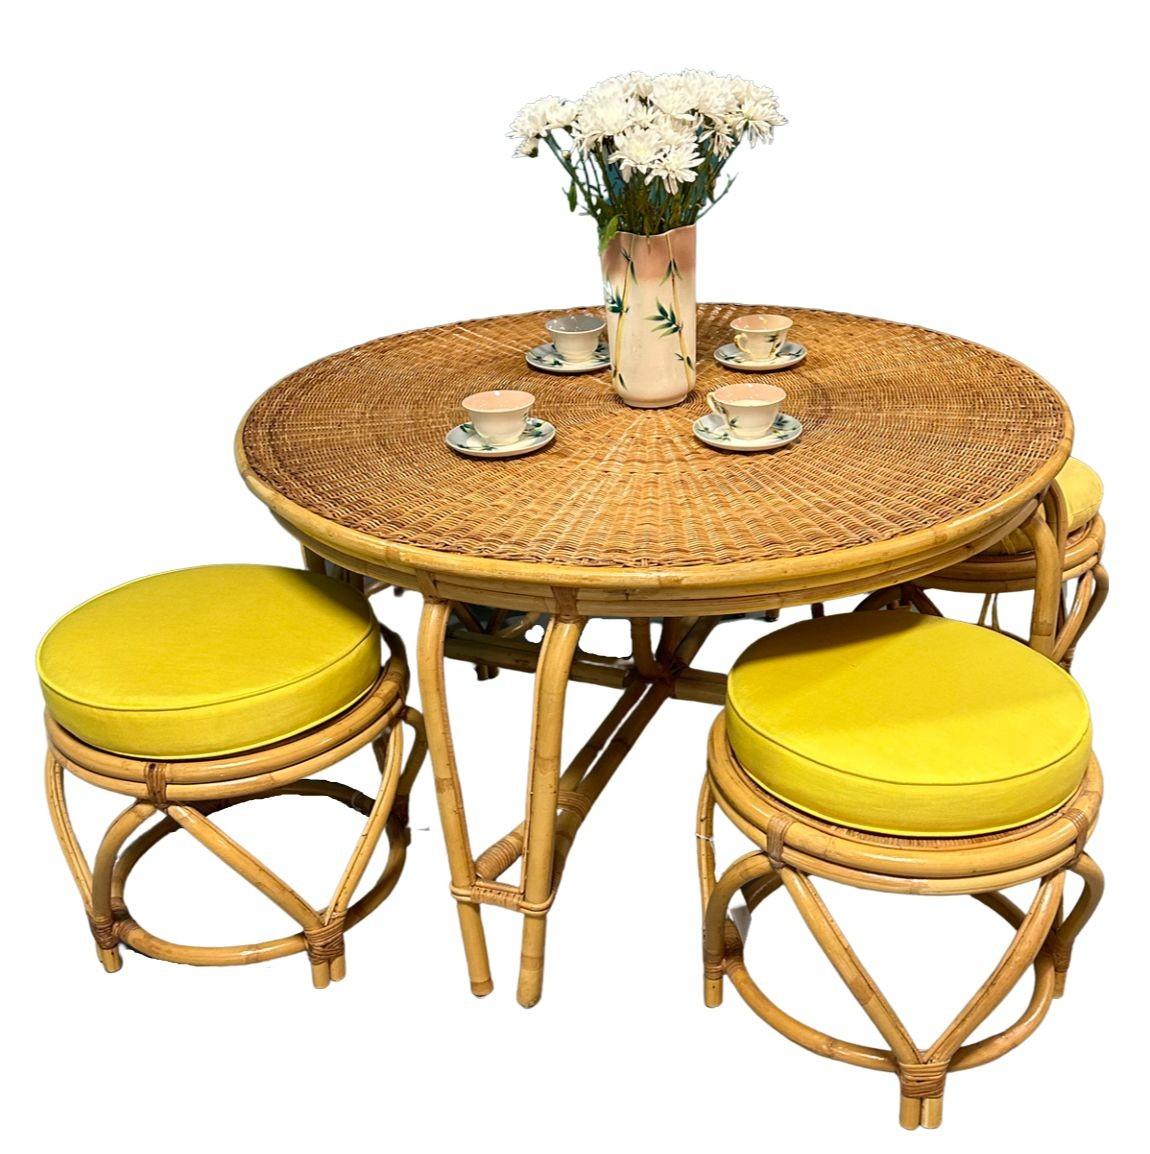 Mid-century rattan dining set featuring four dining chairs and a dining table. This minimal, yet elegant dining table and chairs chair set features a steam-pressed sculptural form with a round glass top for the table.  This set can easily